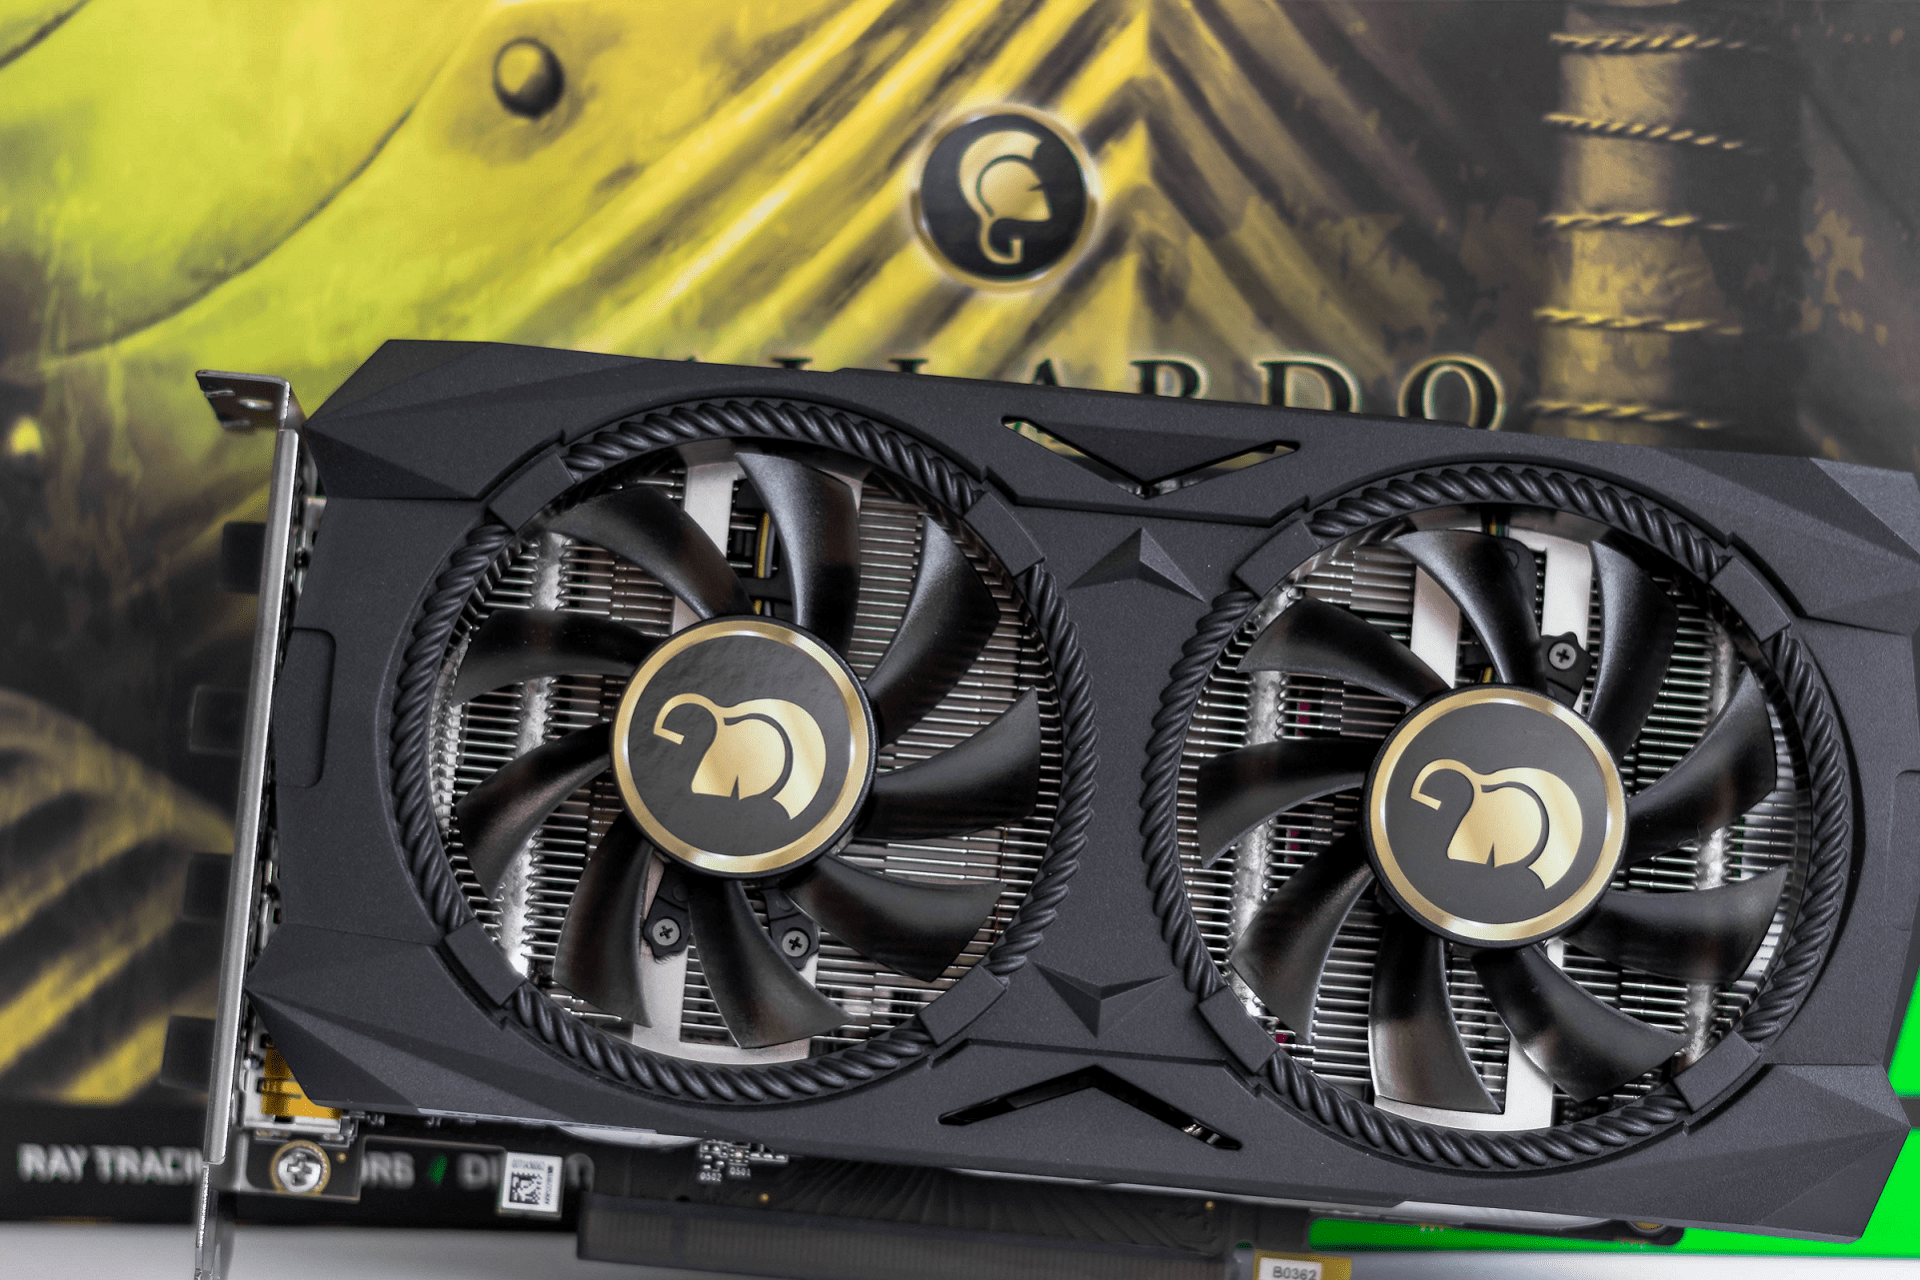 Forbrydelse Reporter Mig 5 Ways to Fix Your GPU when Fans Spin Then Stop Repeatedly